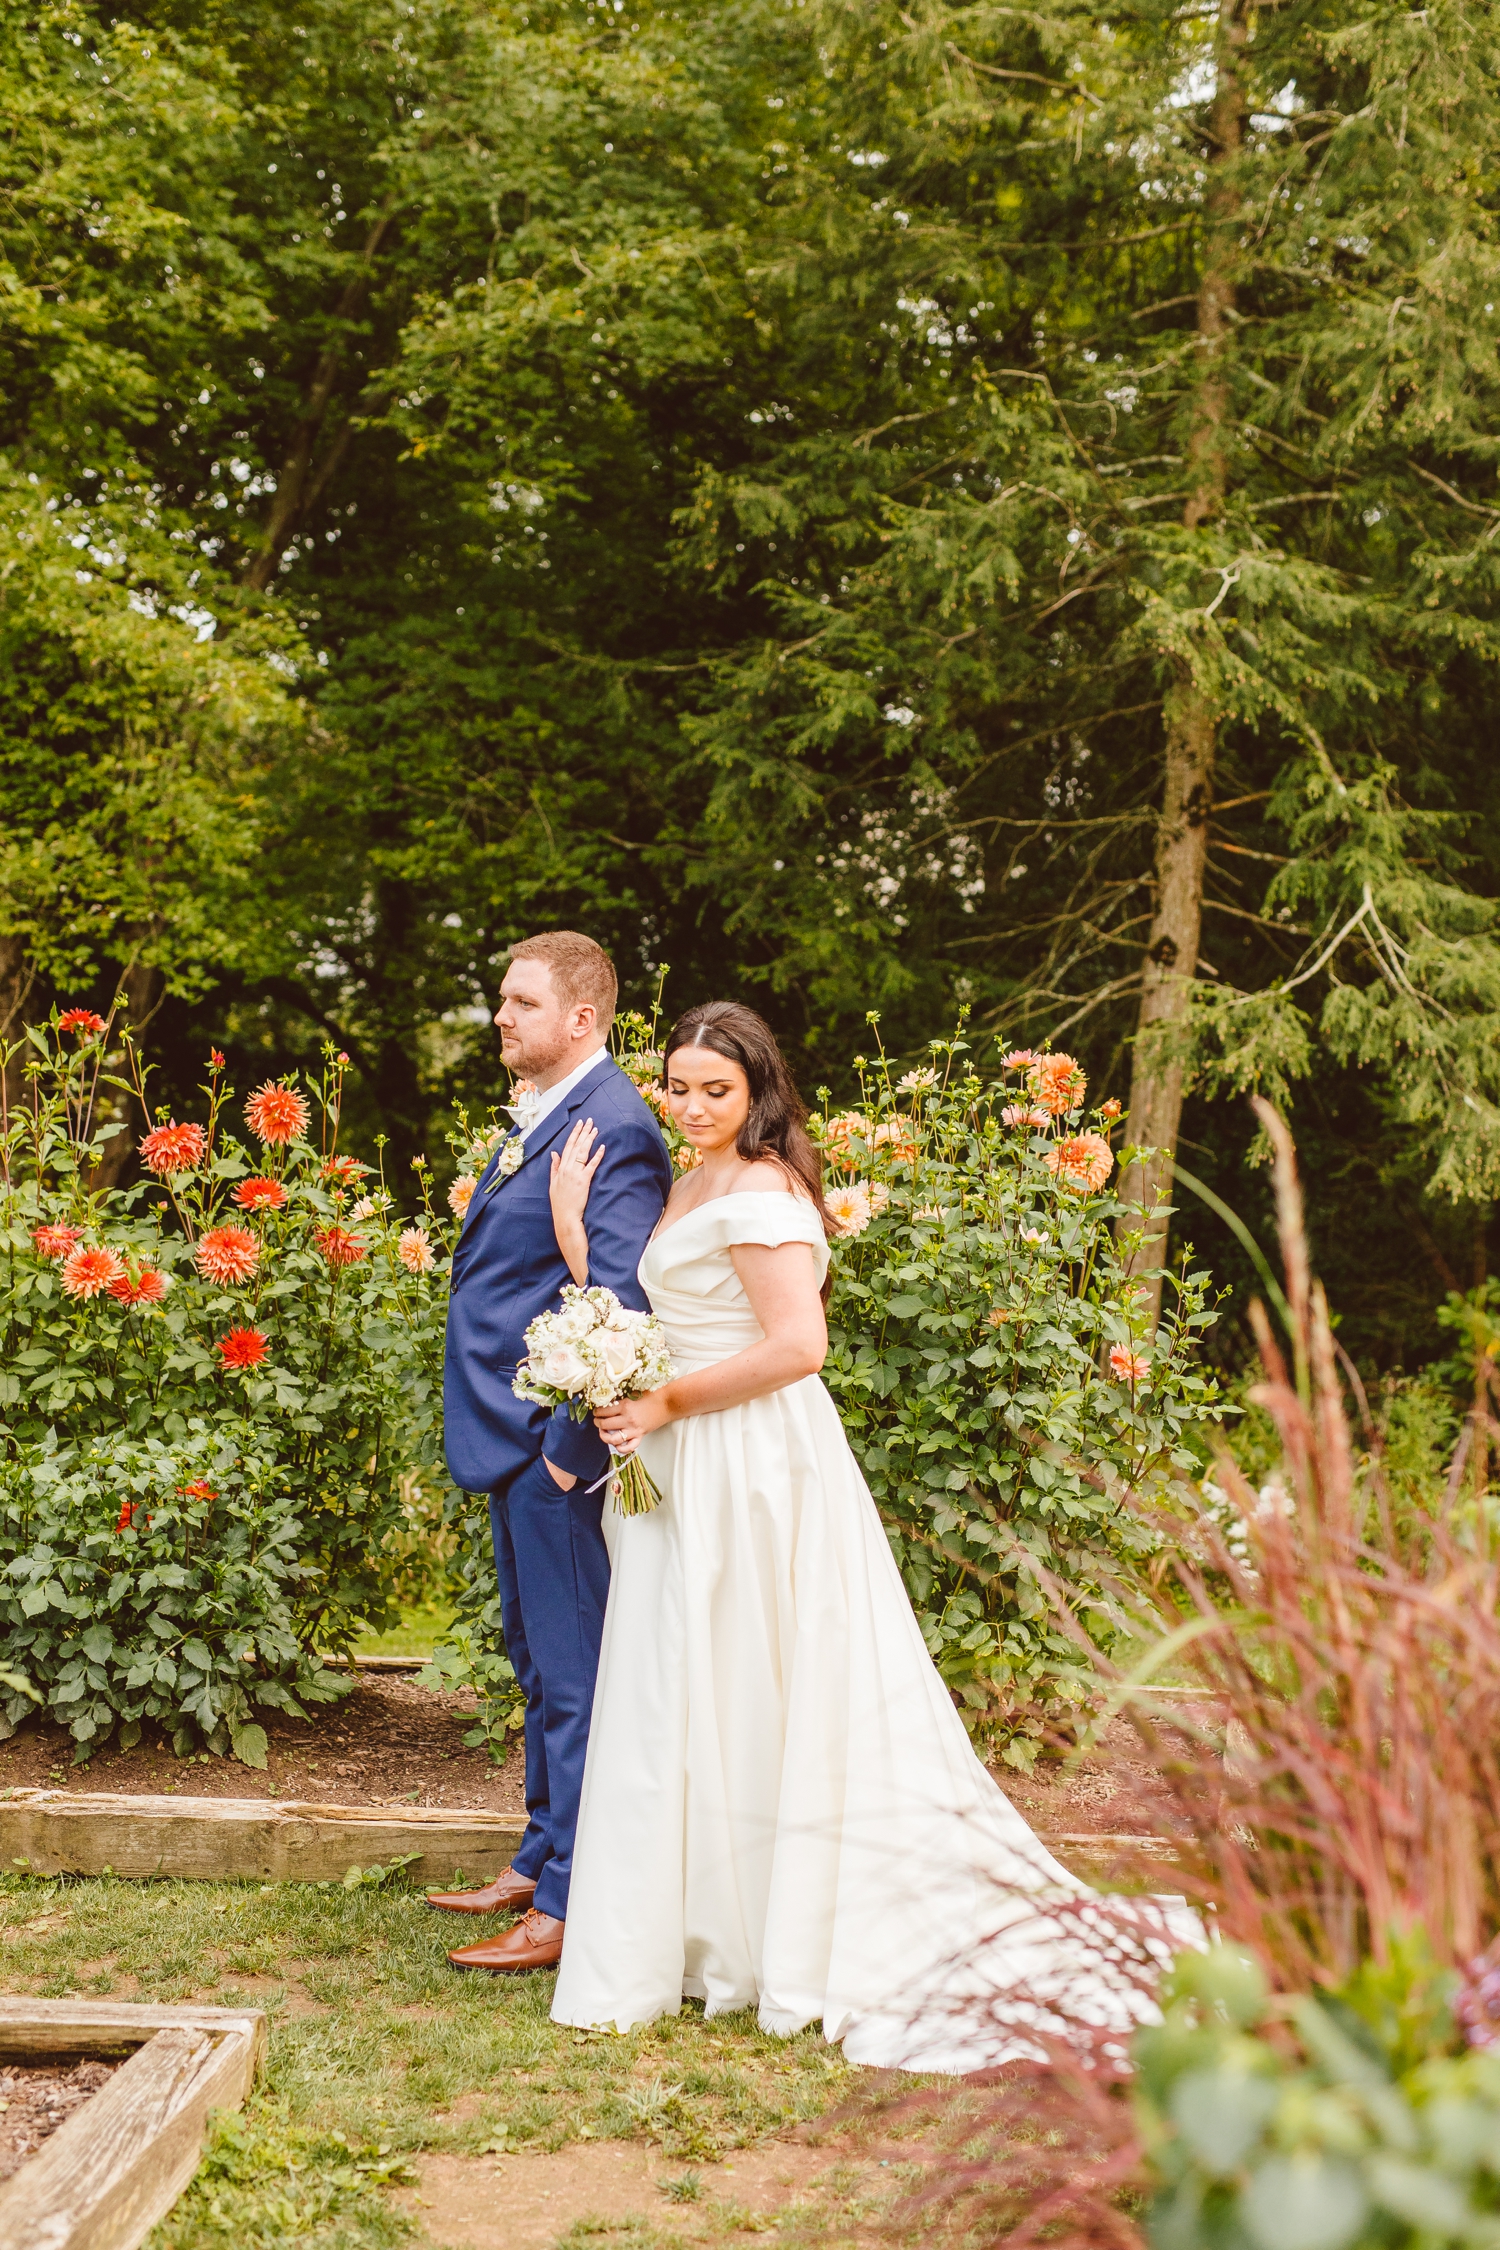 Bride and groom standing in front of flowers in Ladew Topiary Gardens | Brooke Michelle Photo